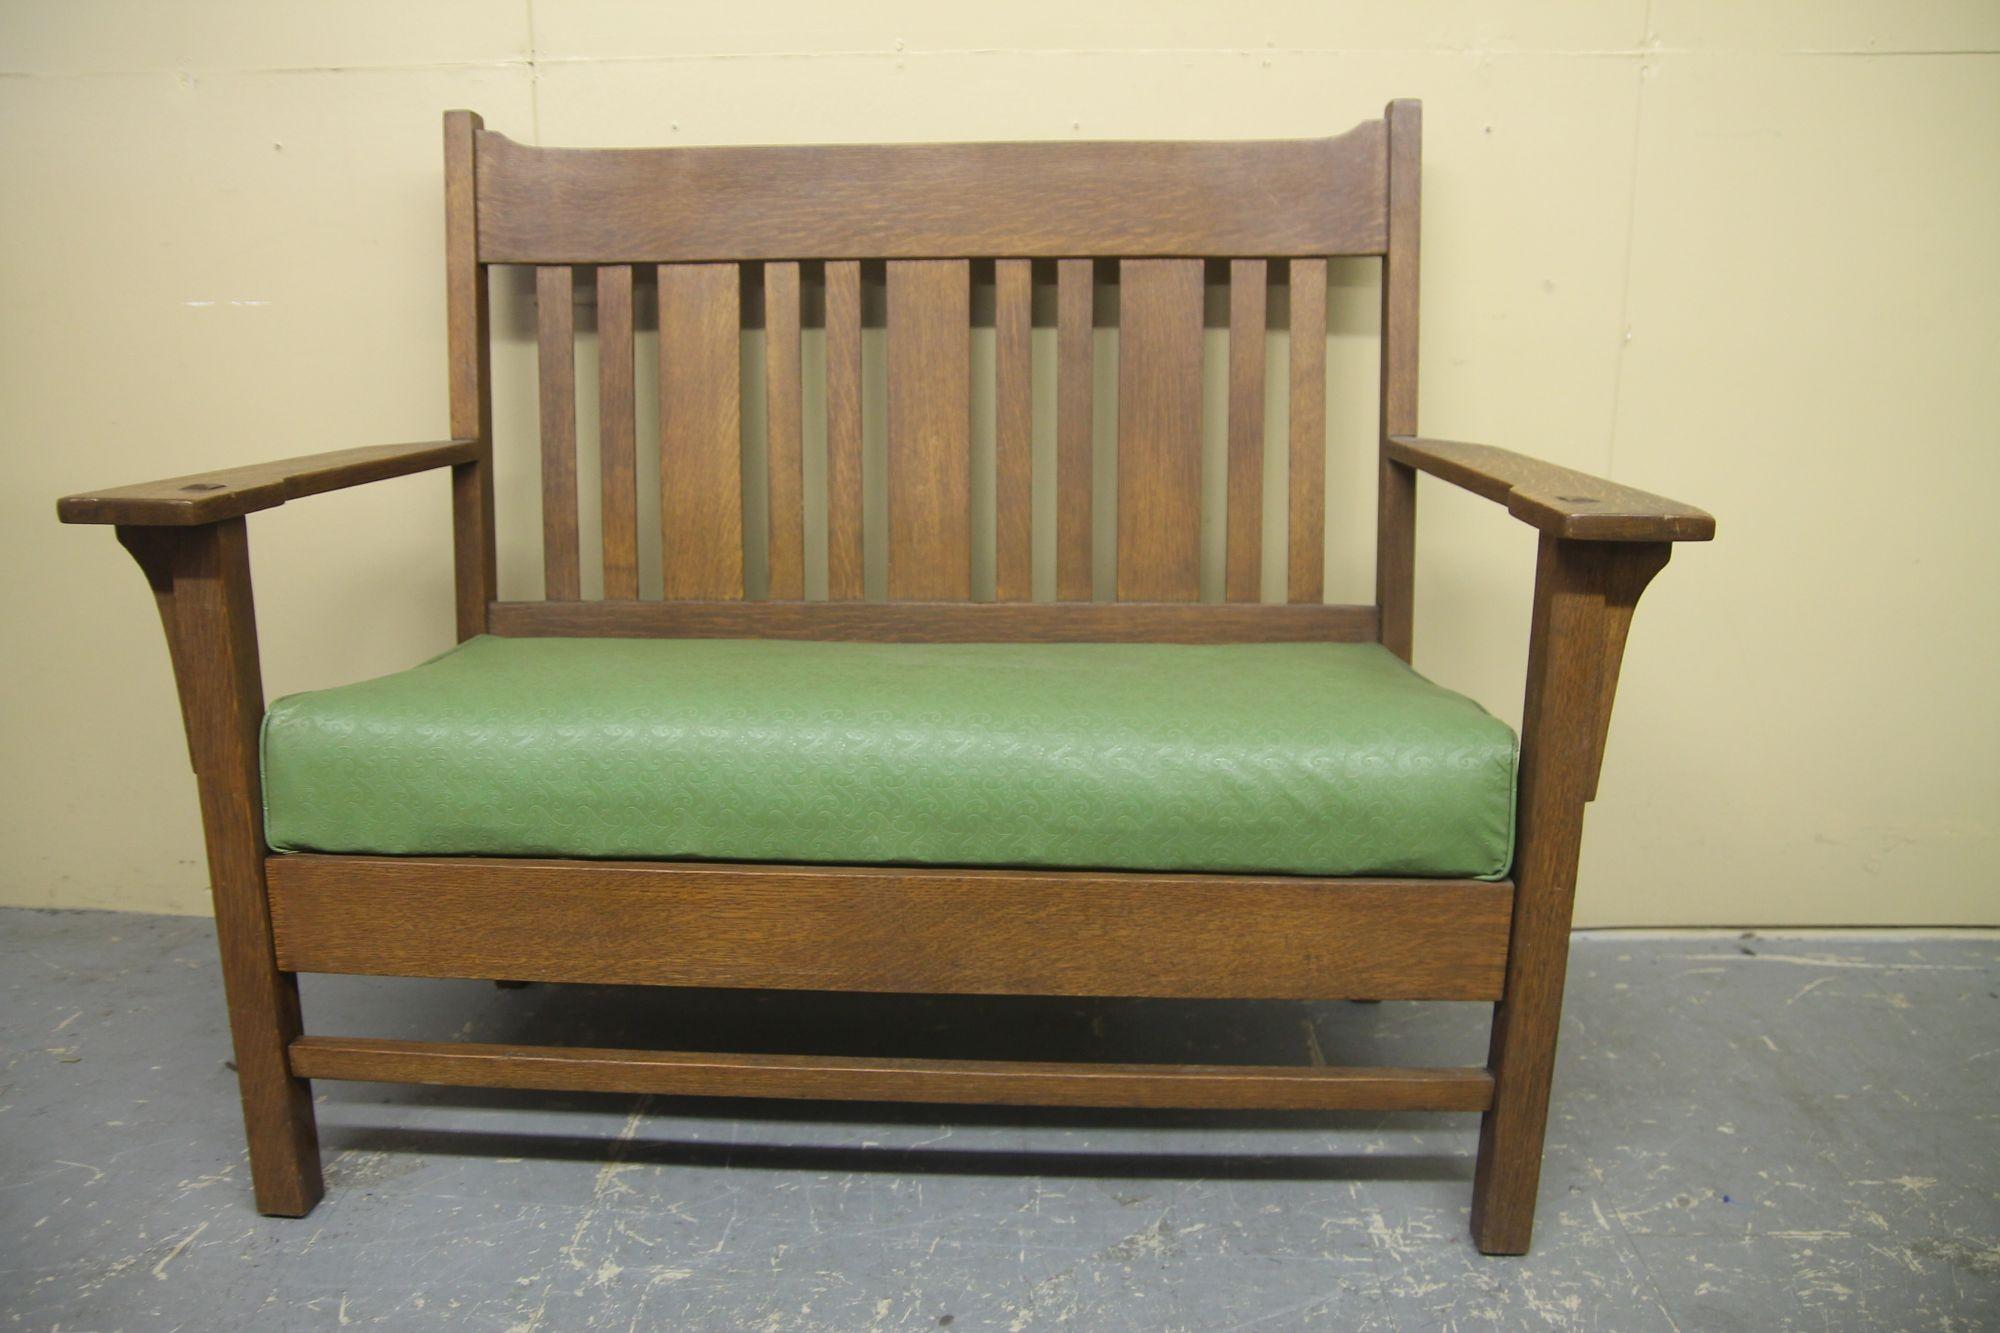 Pleased to offer a nice Arts and Crafts quarter sawn oak love seat. This Harden piece retains its original finish.